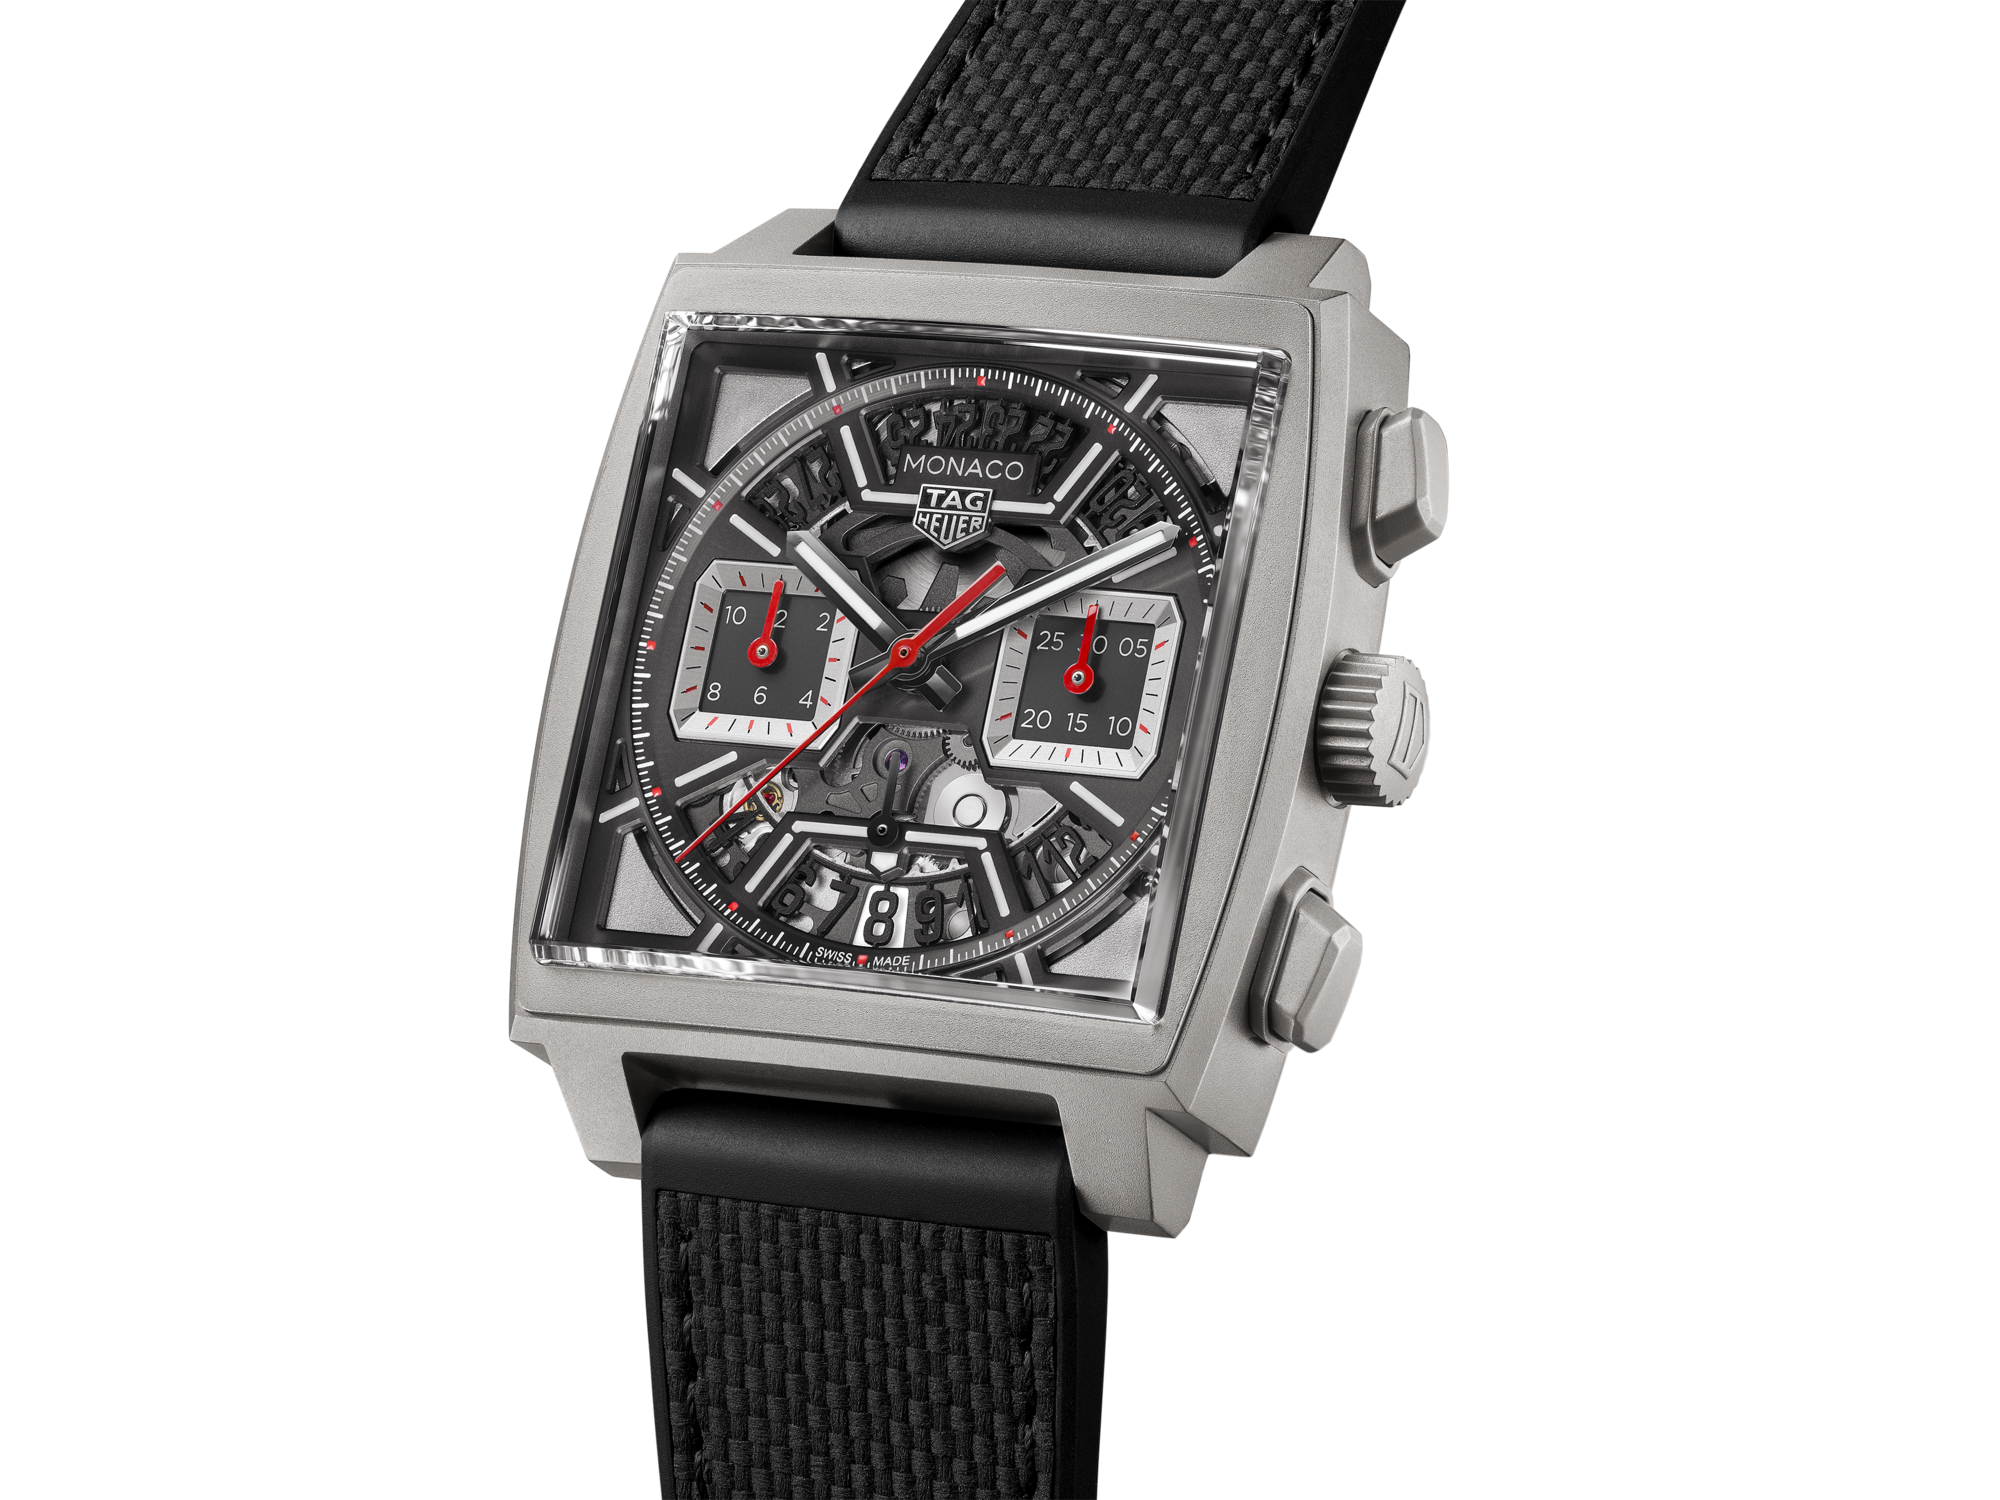 Tag Heuer Monaco Chronograph 39mm Watch - Black Dial - Embossed Black Rubber & Leather Band - Black Titanium Square Case